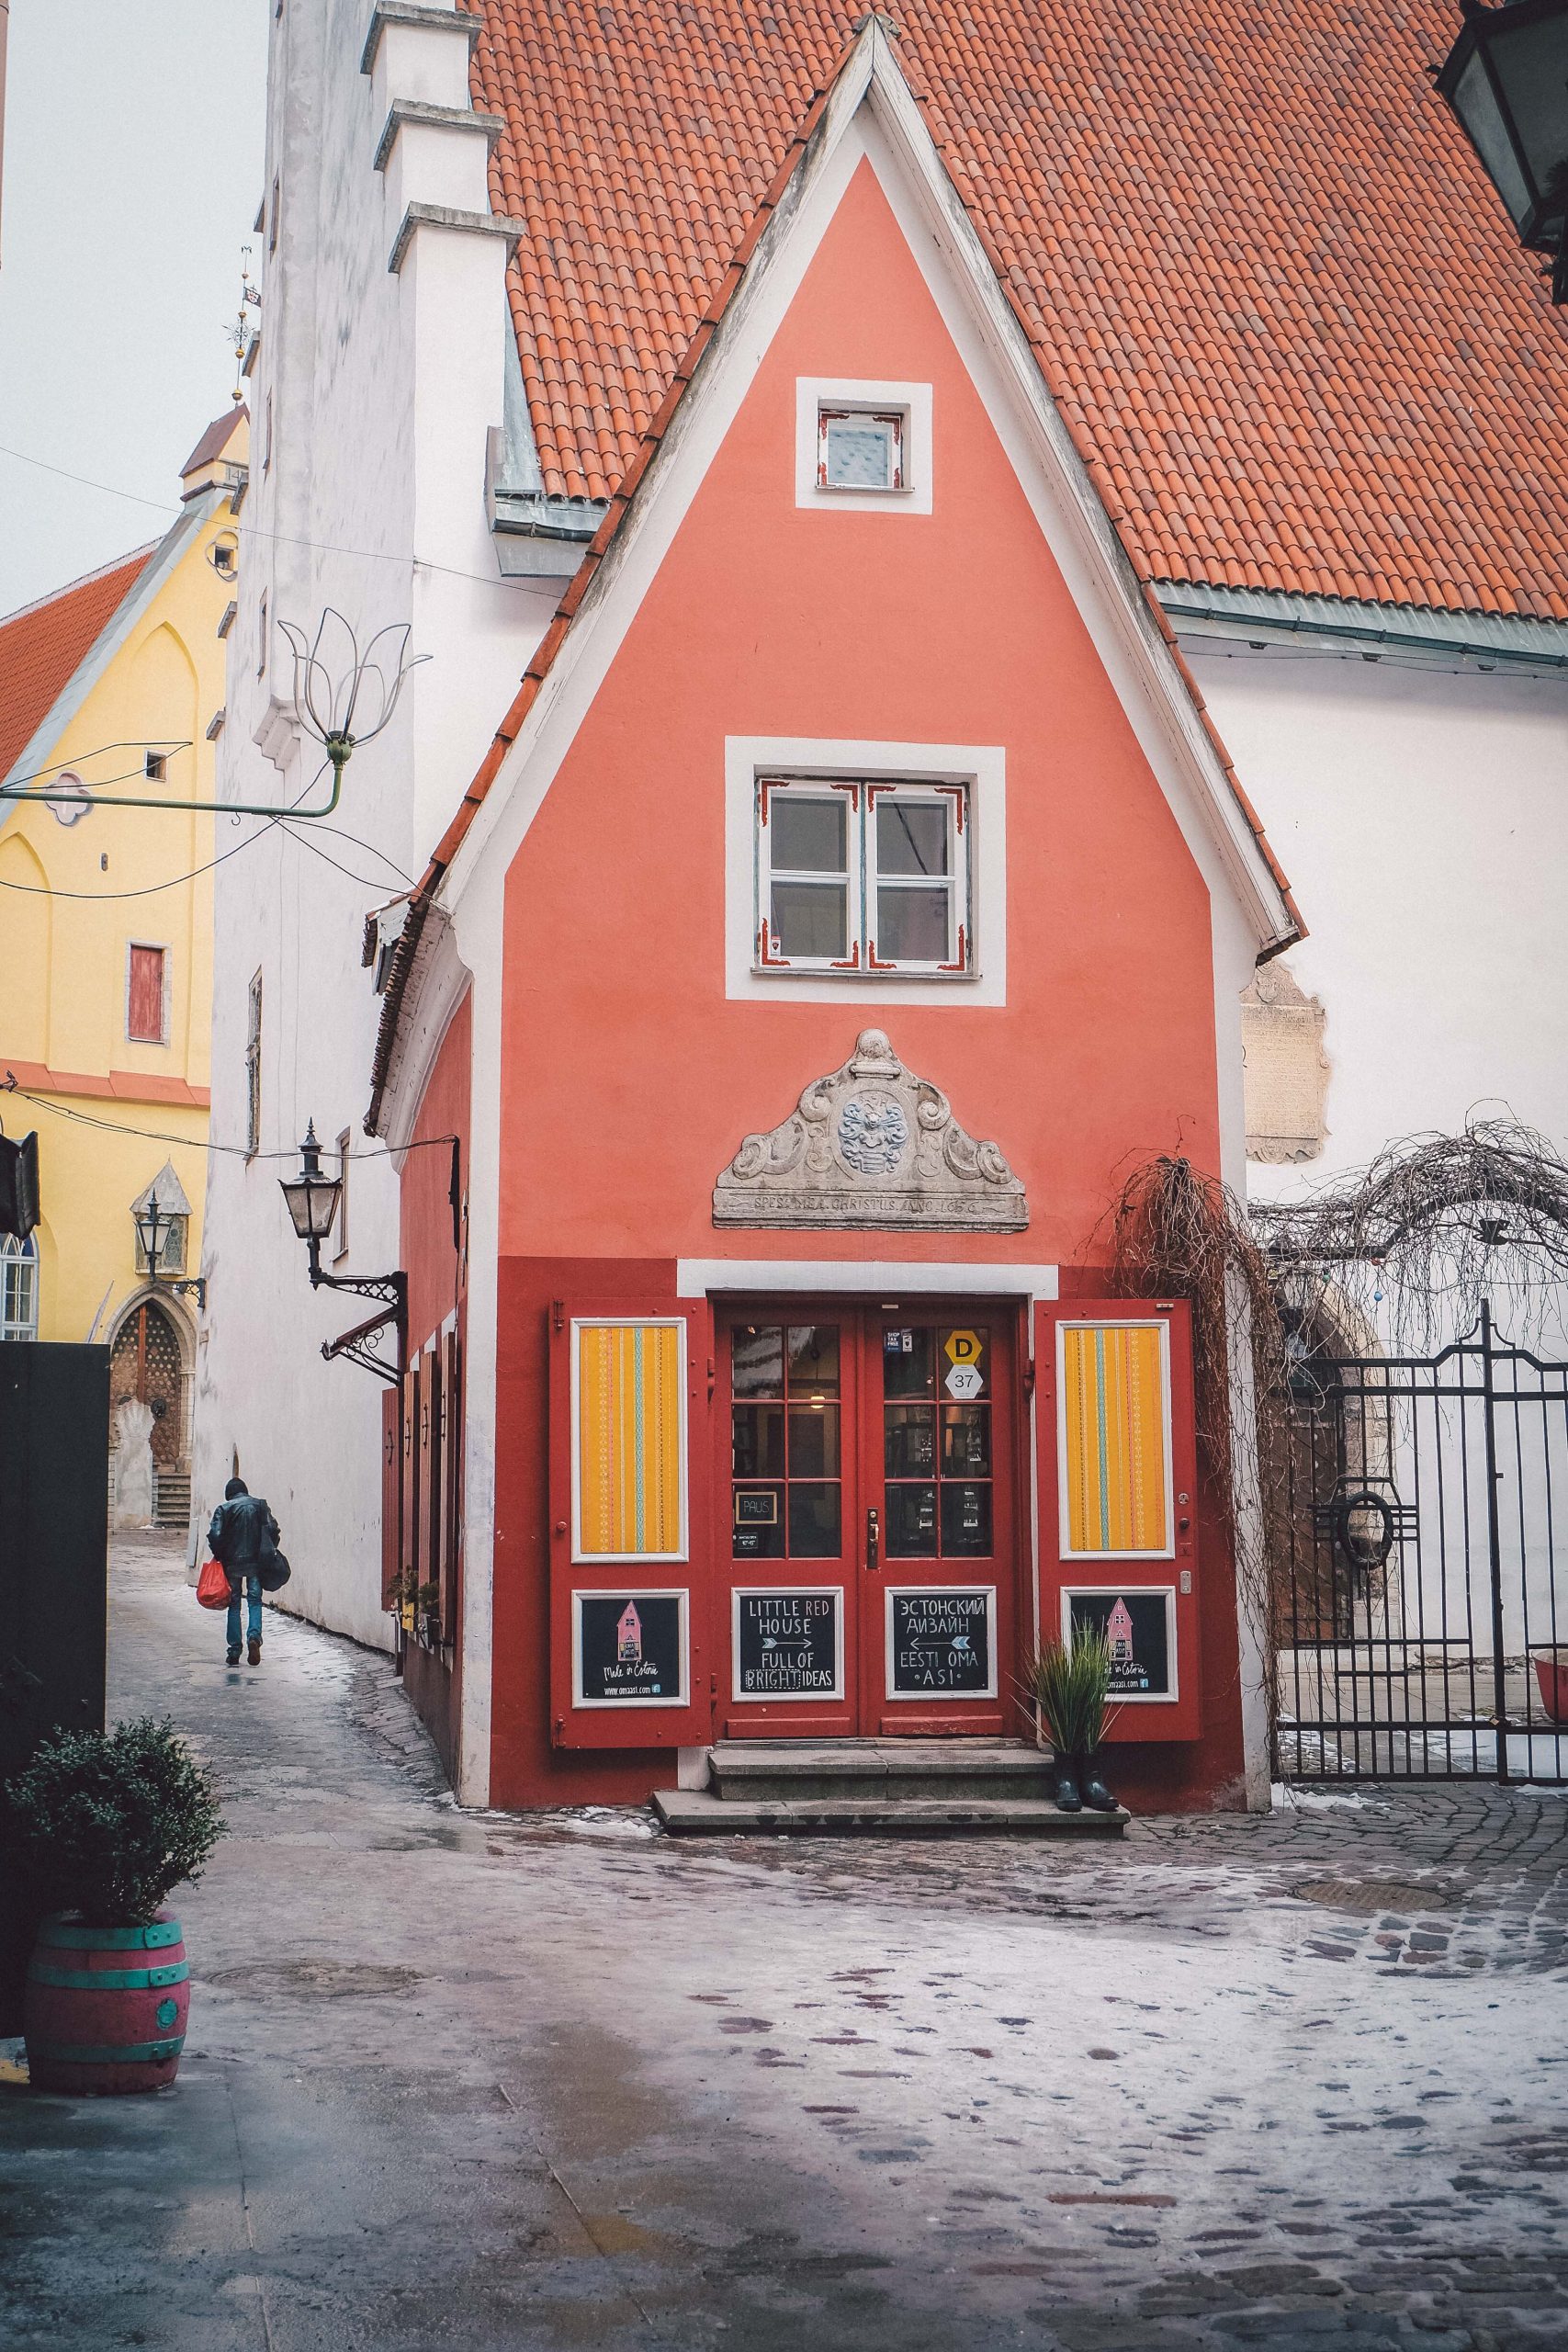 The House At the End of Tallinn